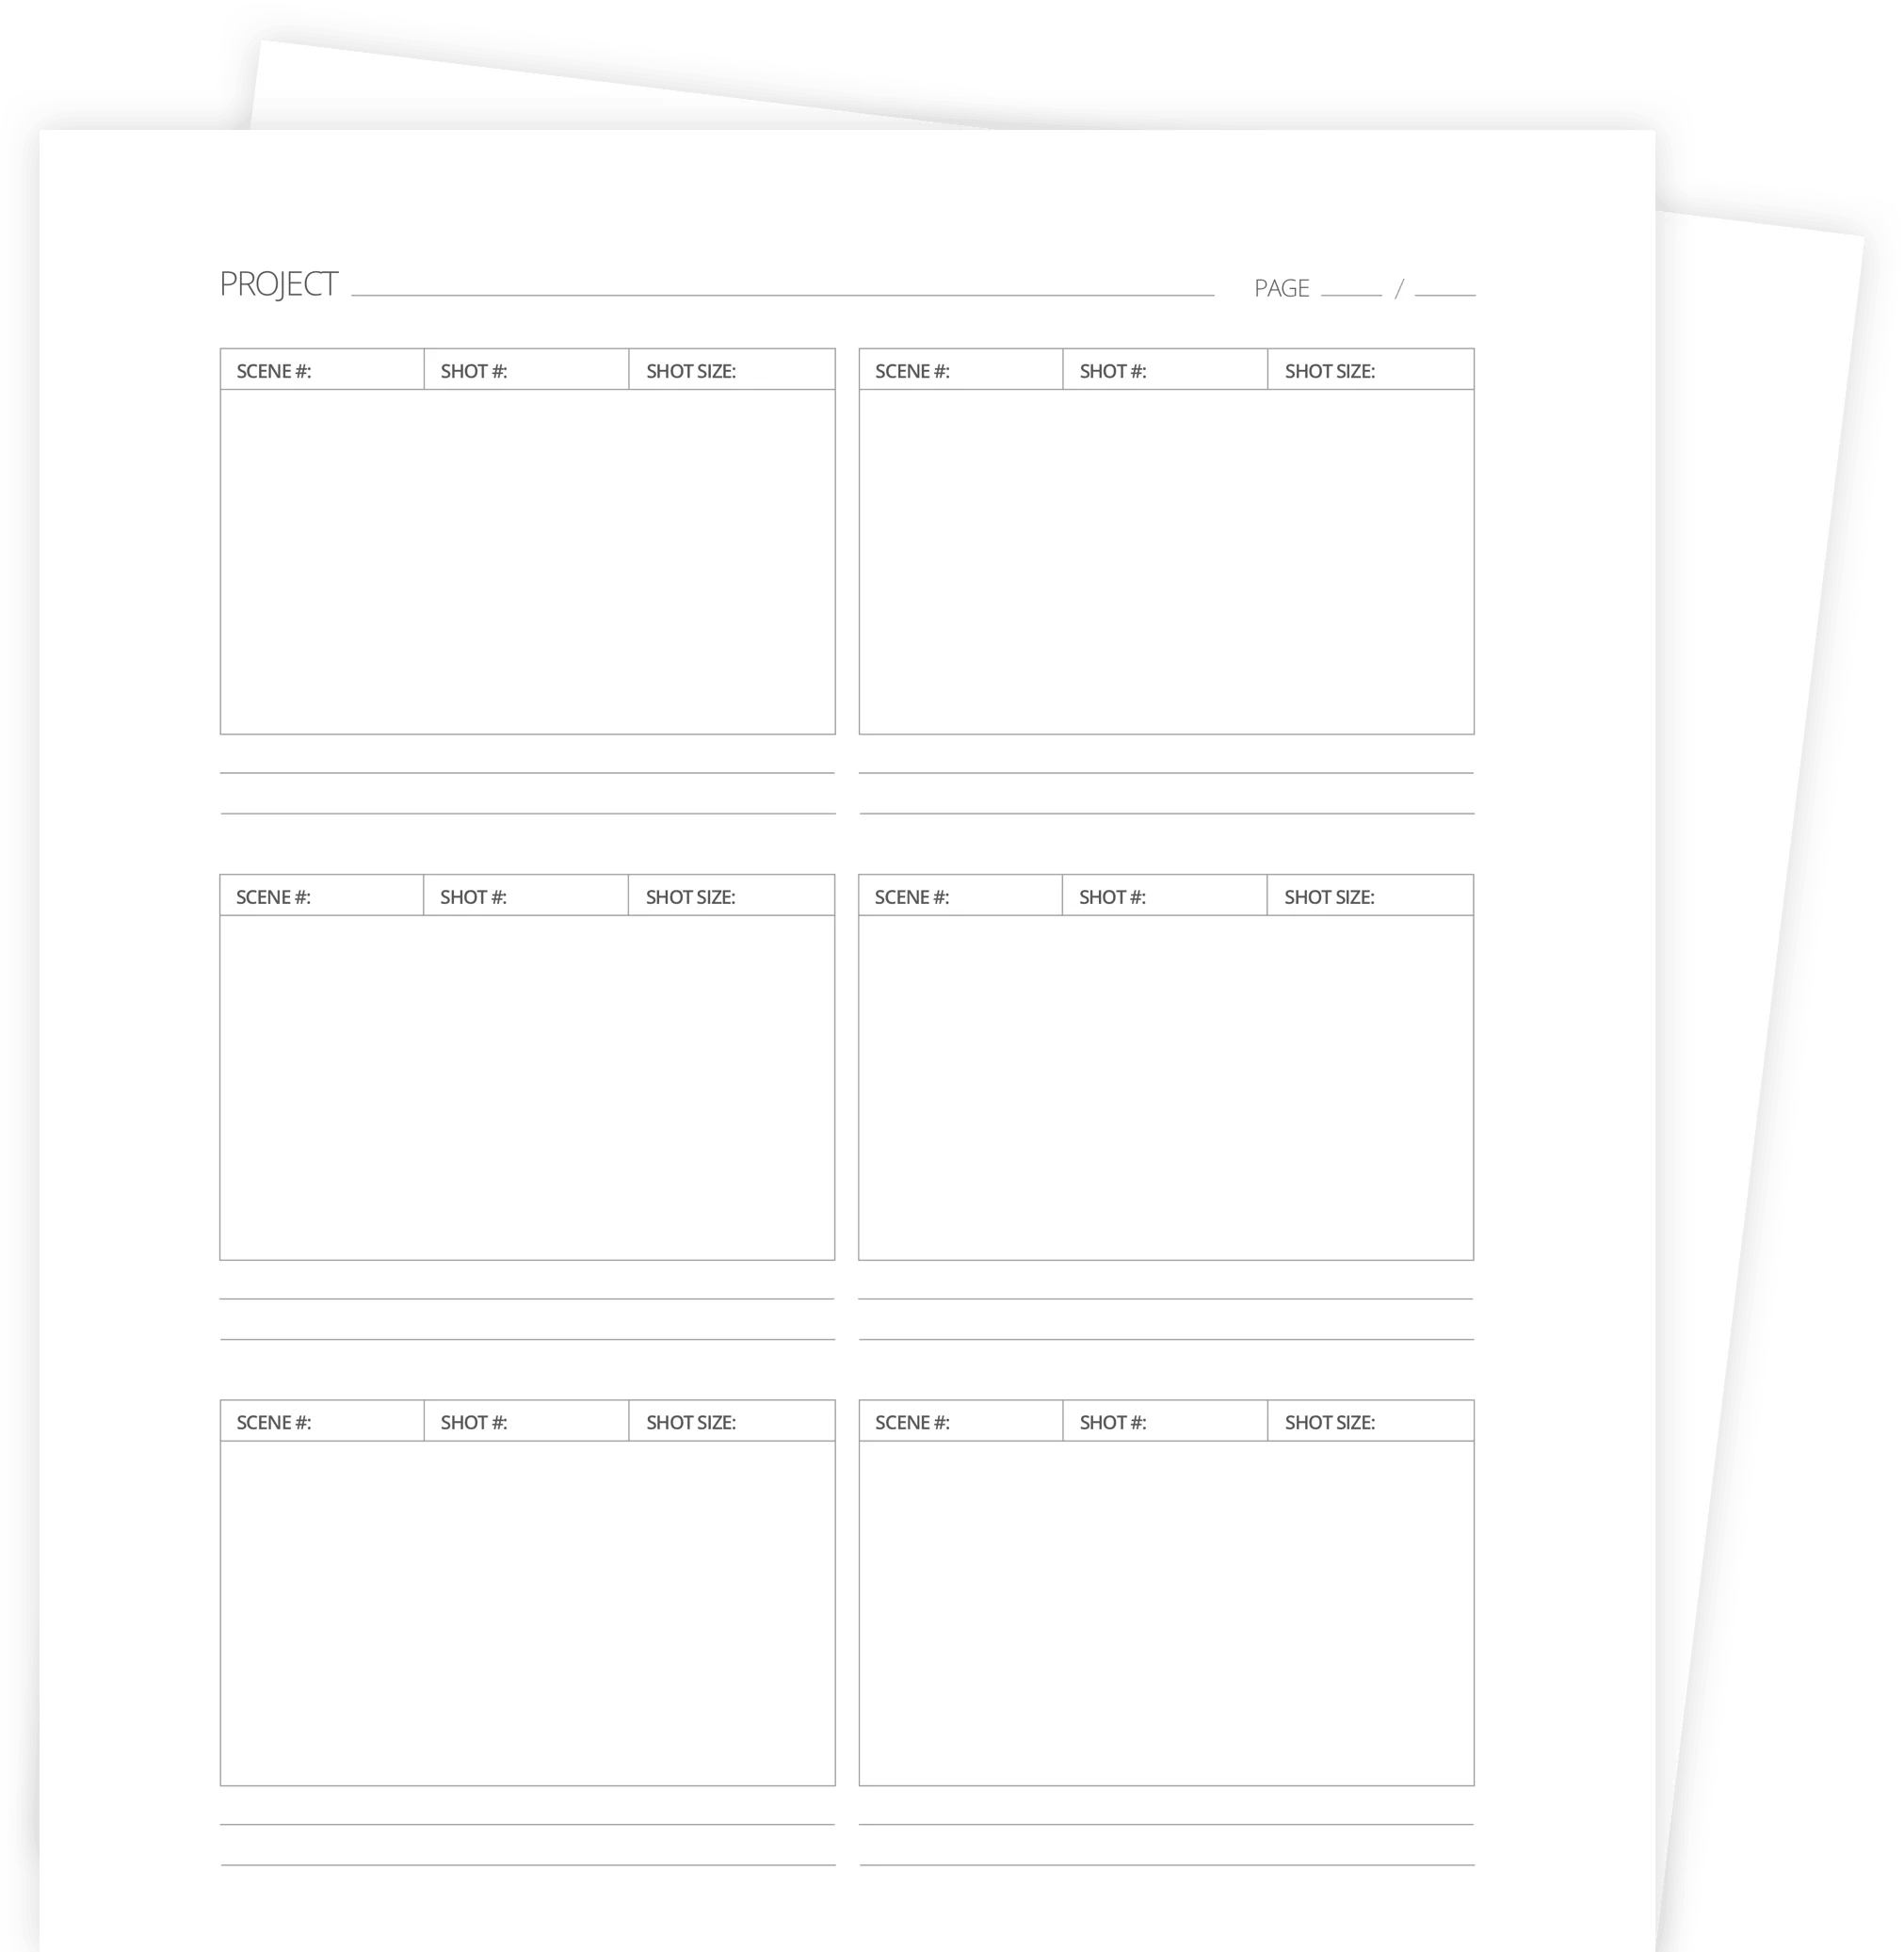 FREE Storyboard Templates & Story board Creator (PDF, PSD, PPT, DOCX) For Shooting Script Template Word